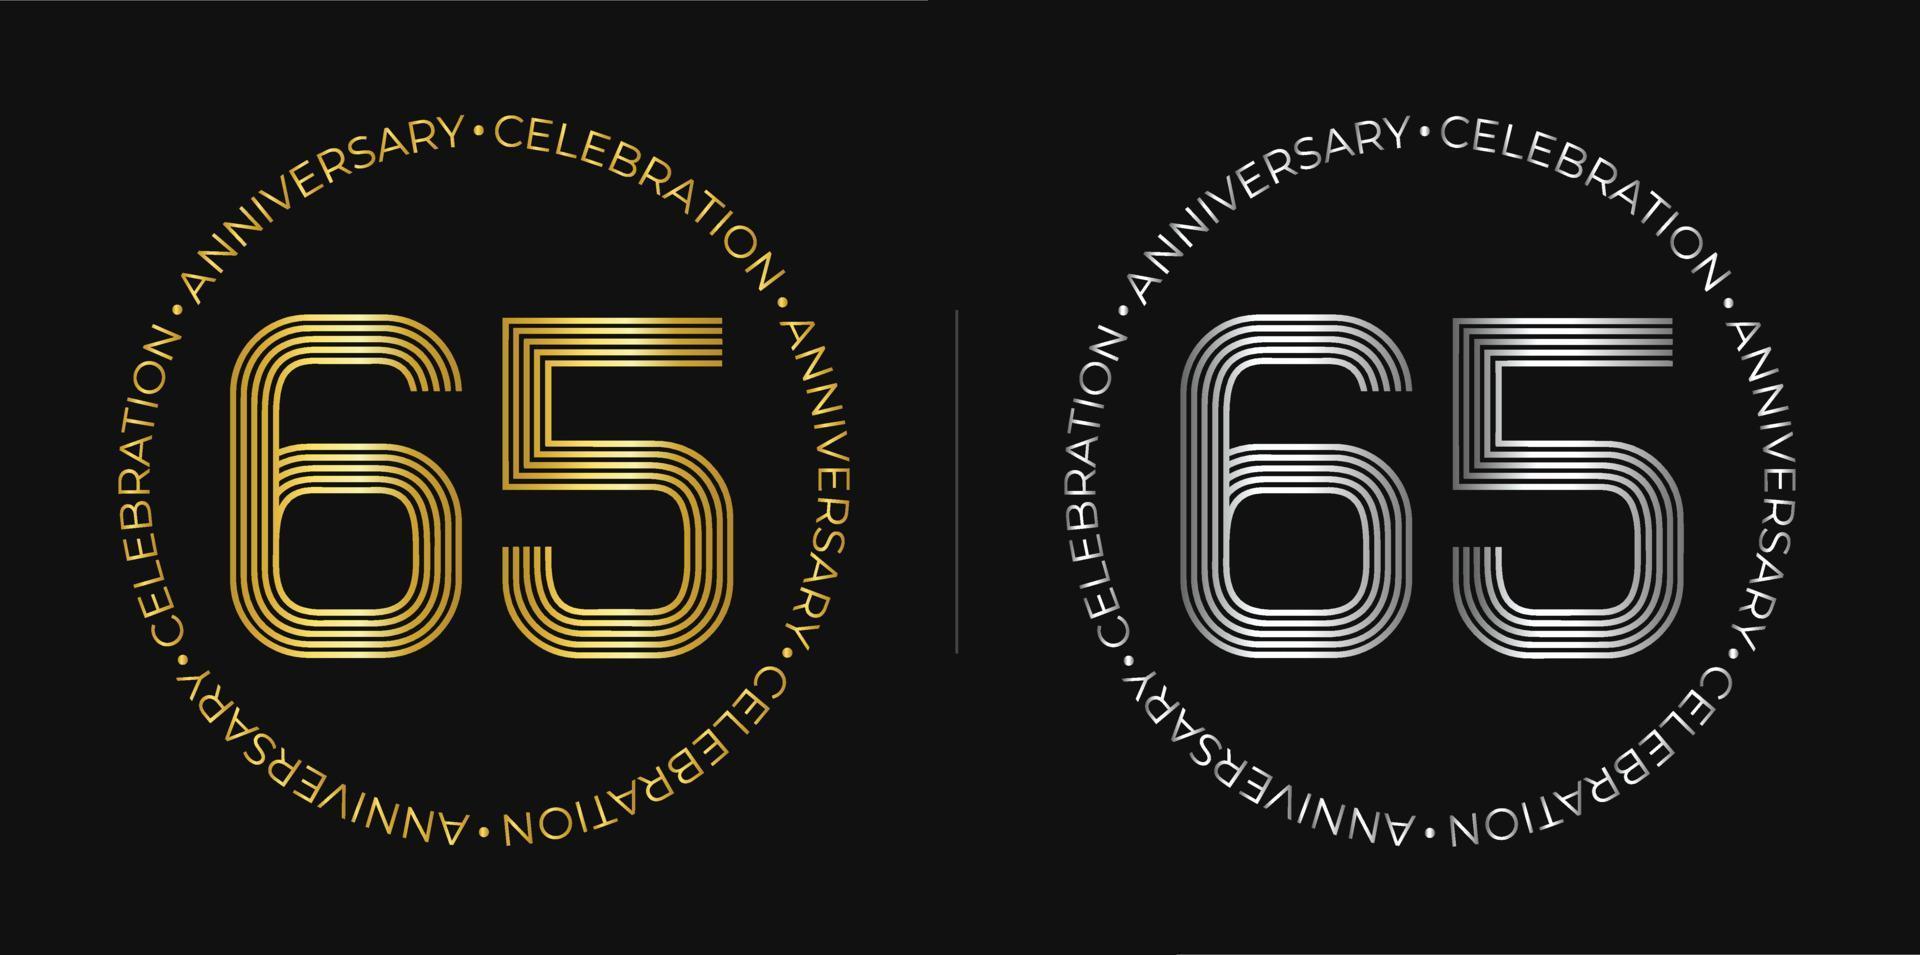 65th birthday. Sixty-five years anniversary celebration banner in golden and silver colors. Circular logo with original numbers design in elegant lines. vector